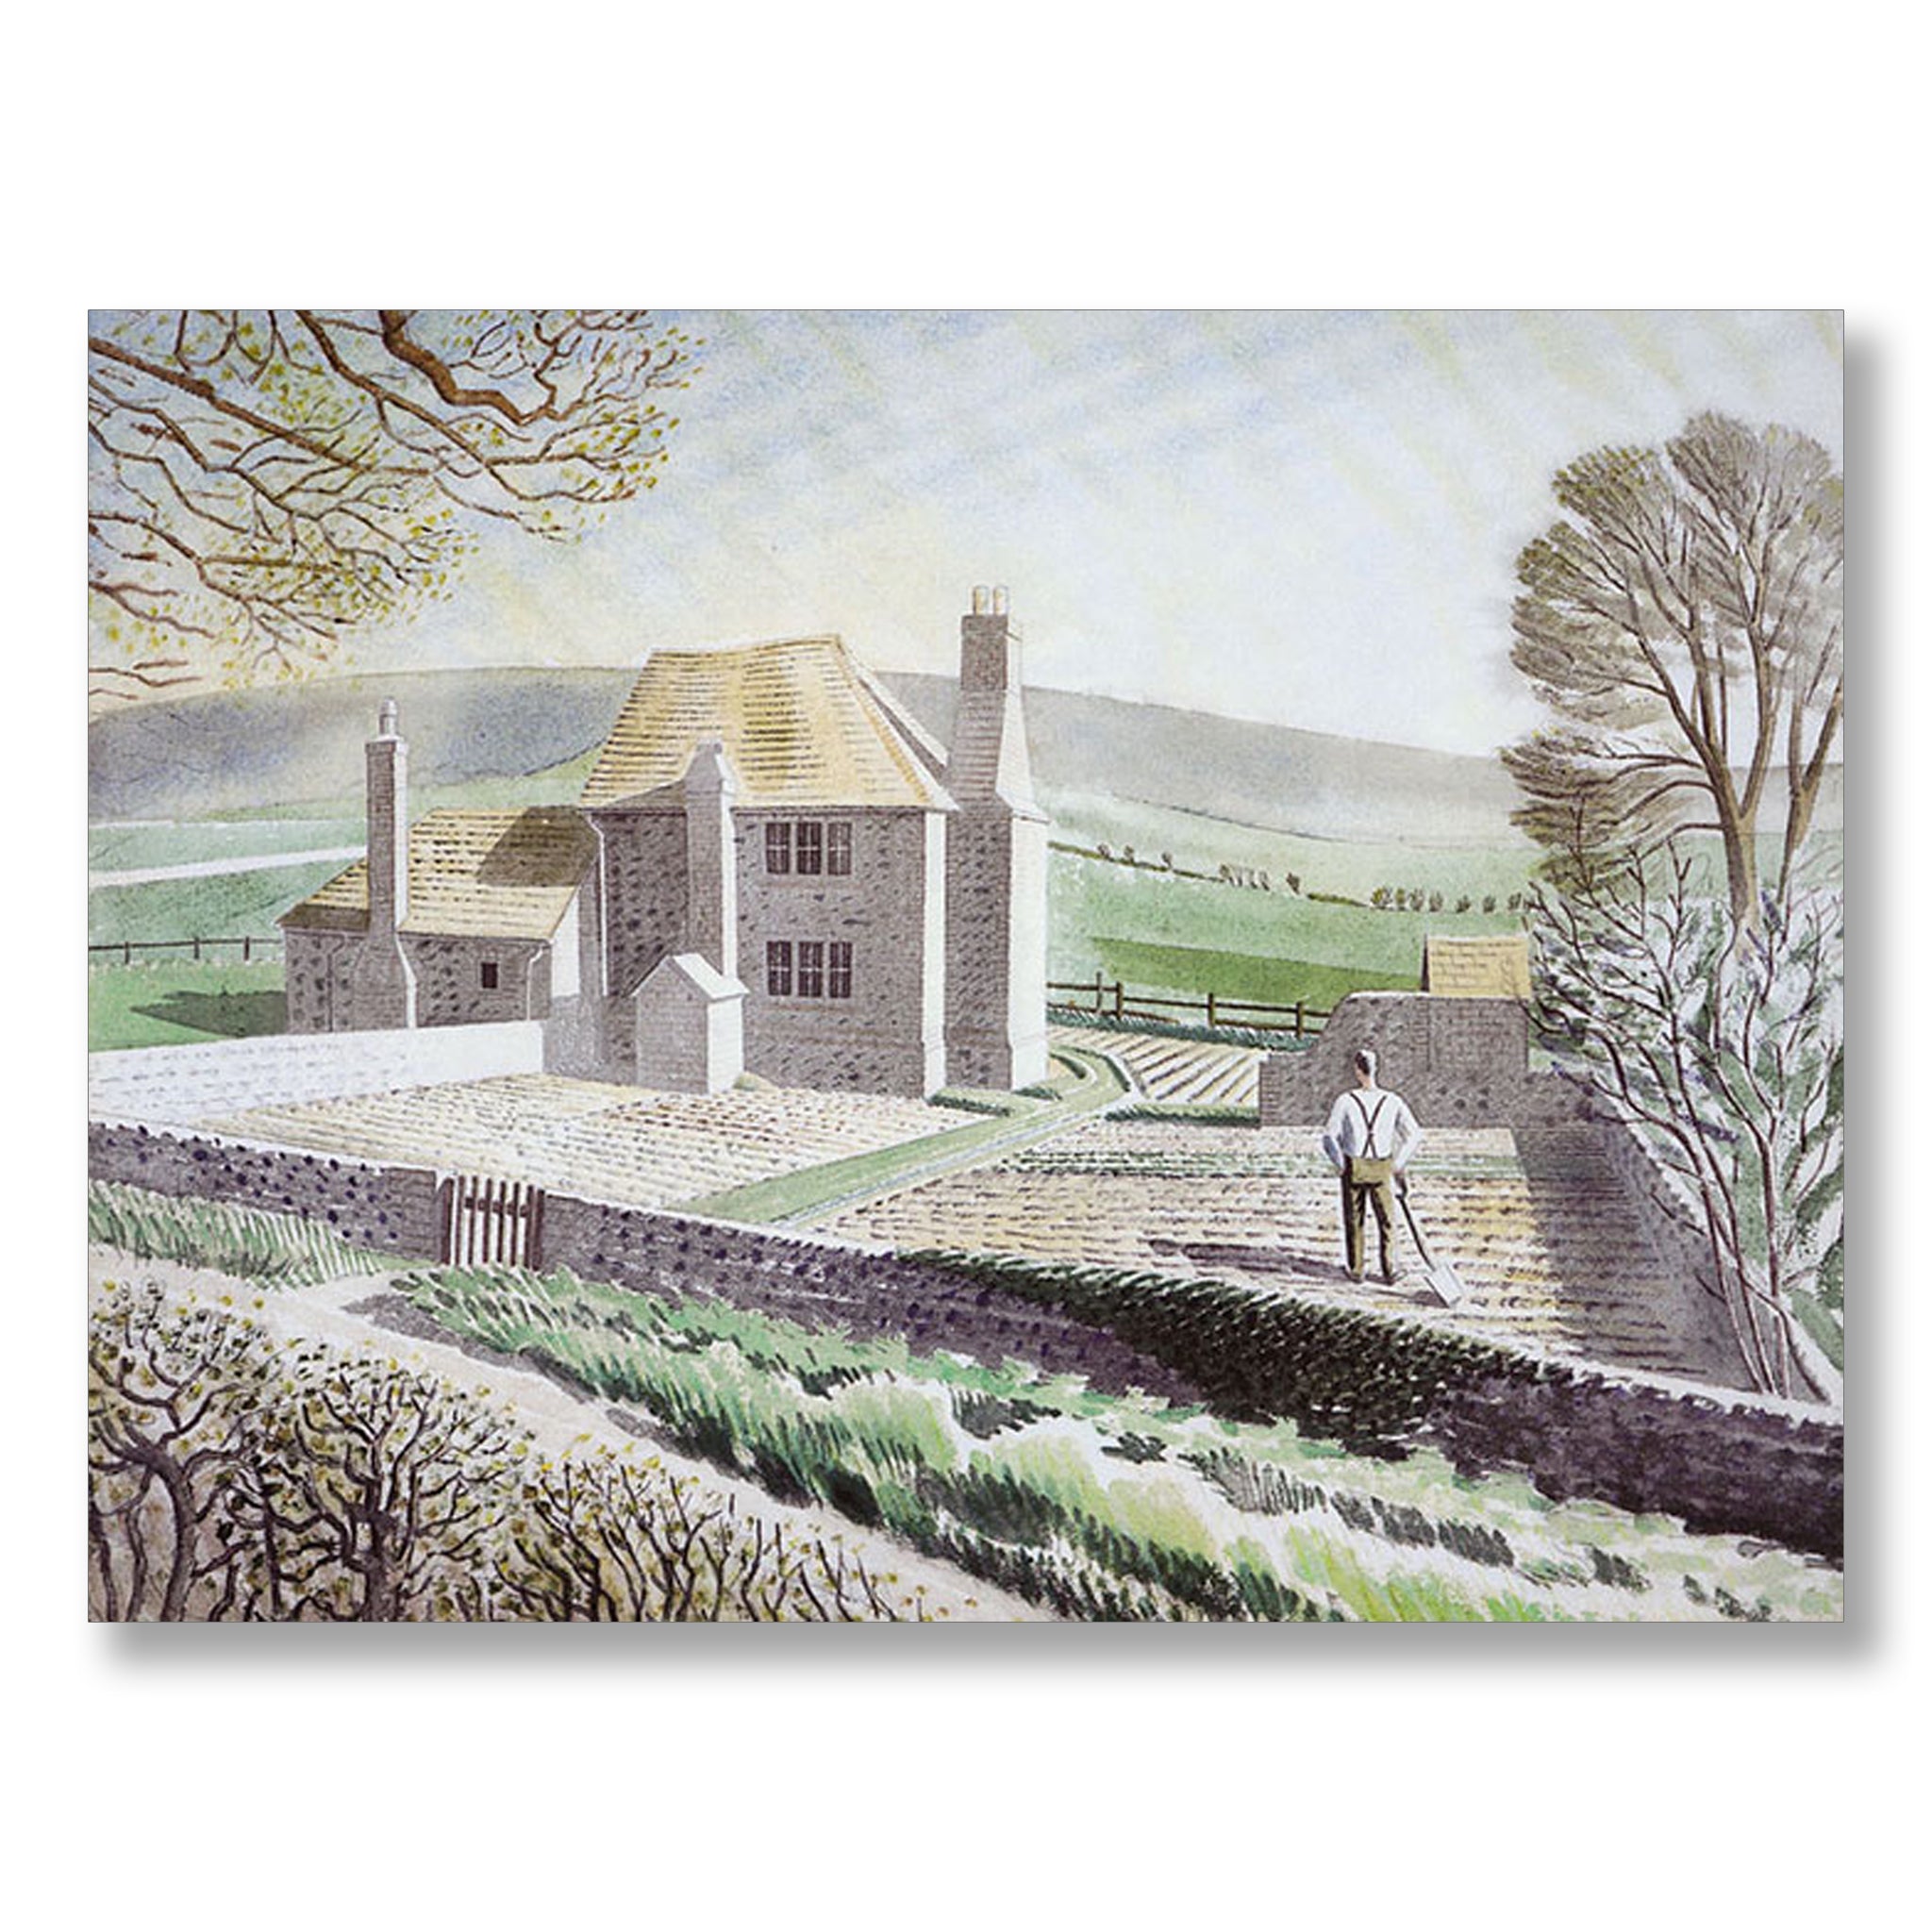 Shepherd's Cottage, Firle by Eric Ravilious